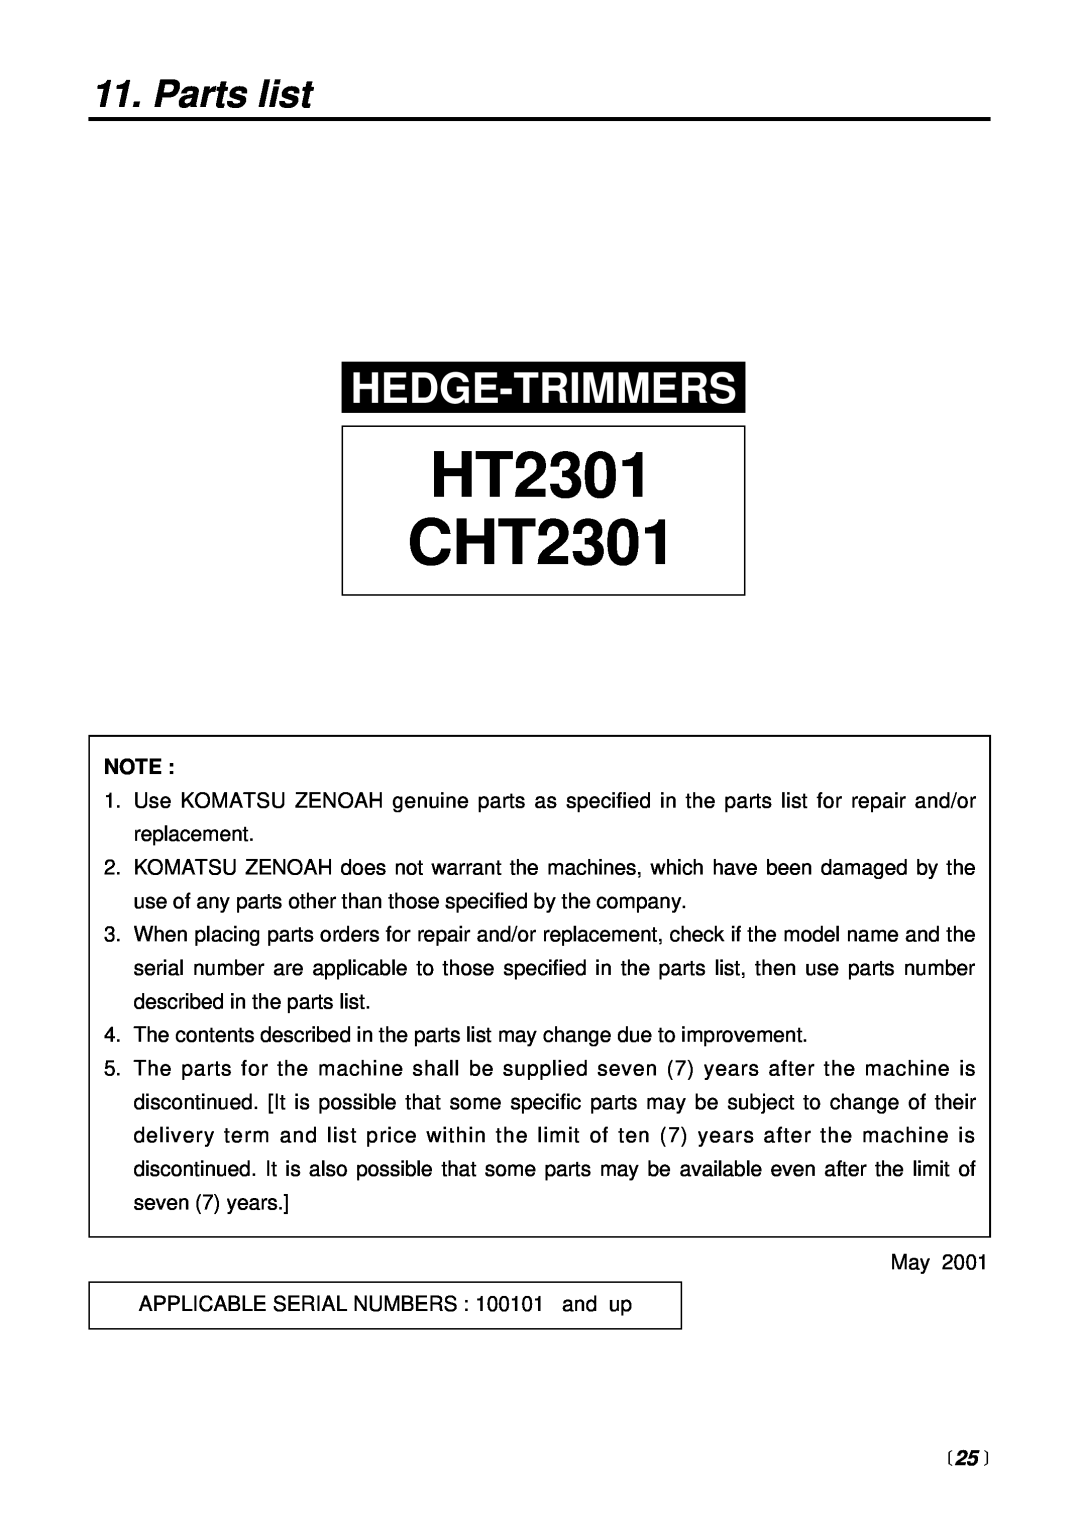 RedMax manual Parts list,  25 , HT2301 CHT2301, Hedge-Trimmers 